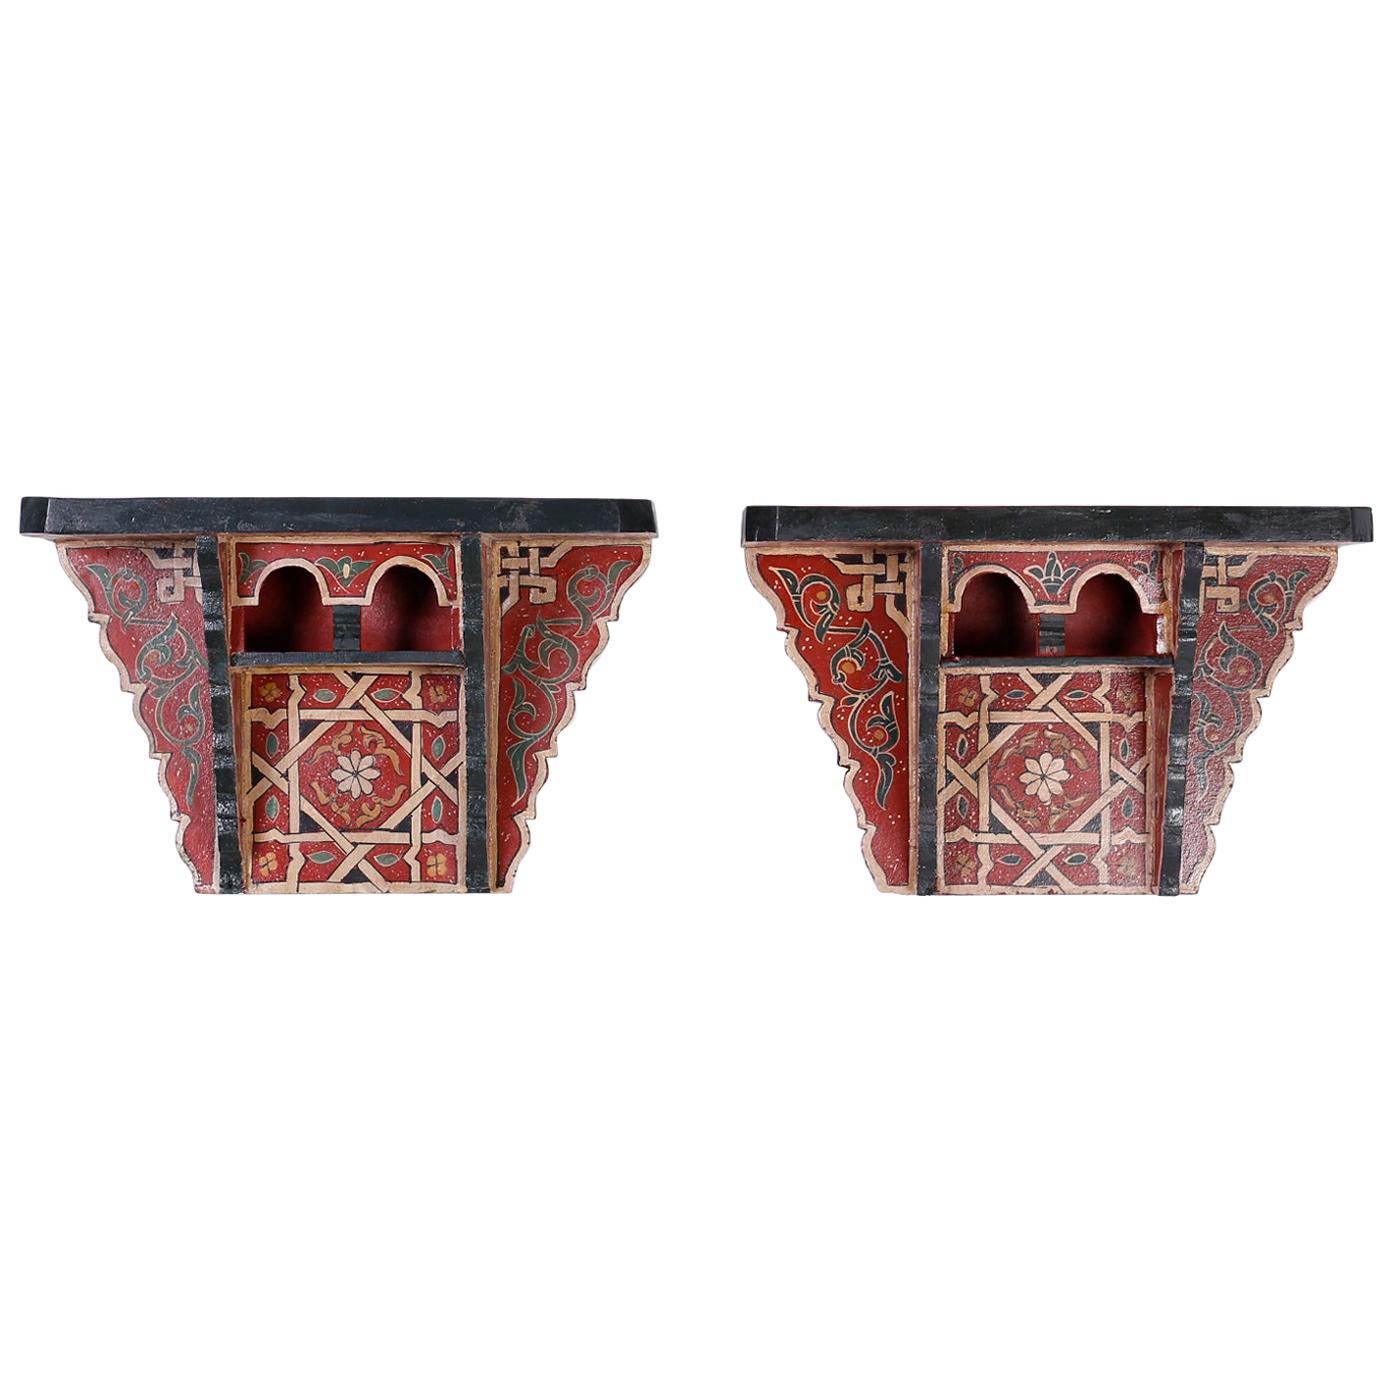 Pair of Painted Wall Shelves or Brackets in the Moorish Manner